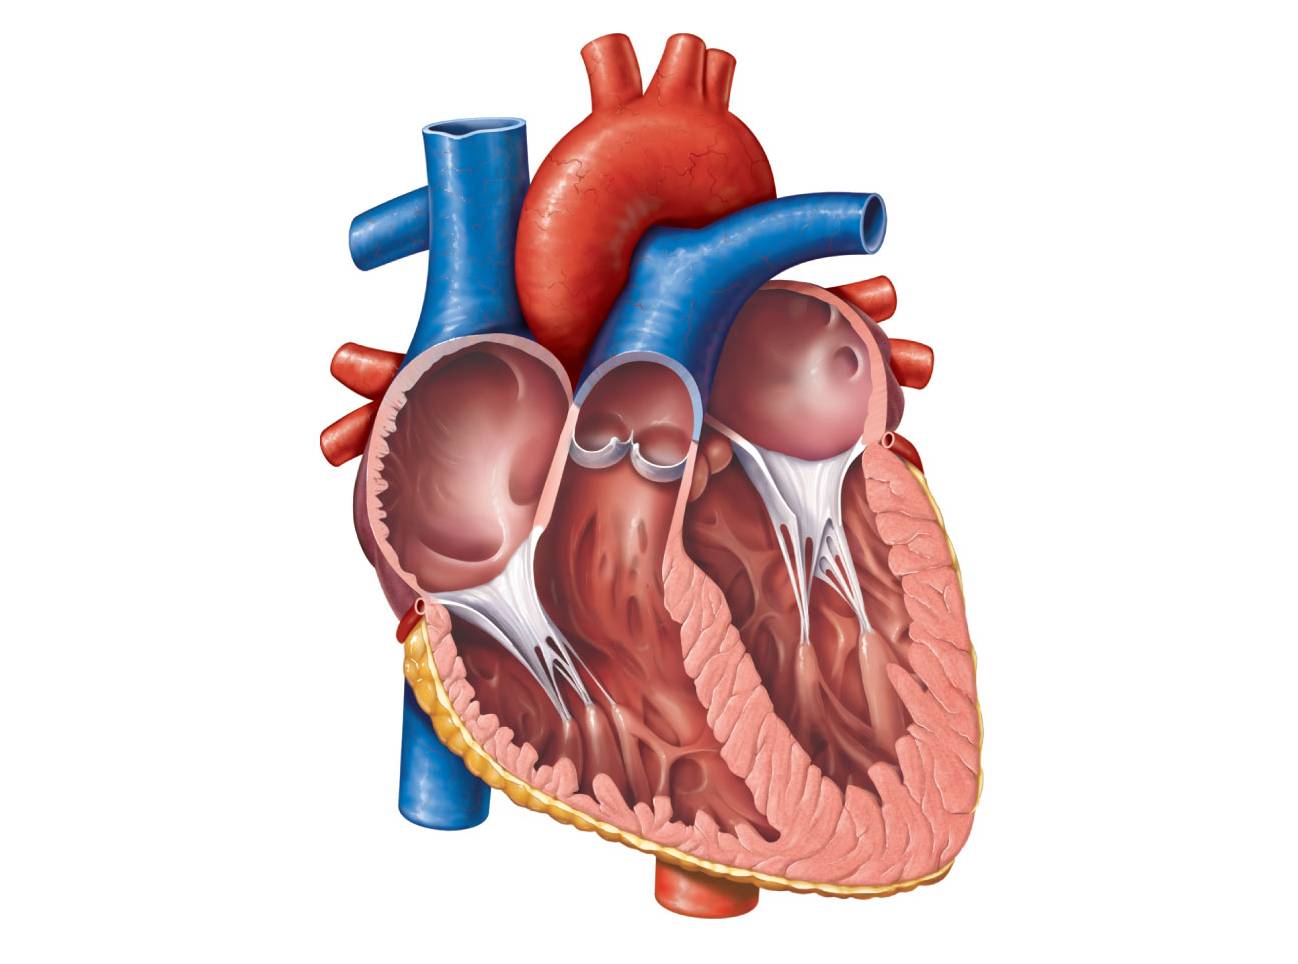 Heart Anatomy Unlabeled - ClipArt Best